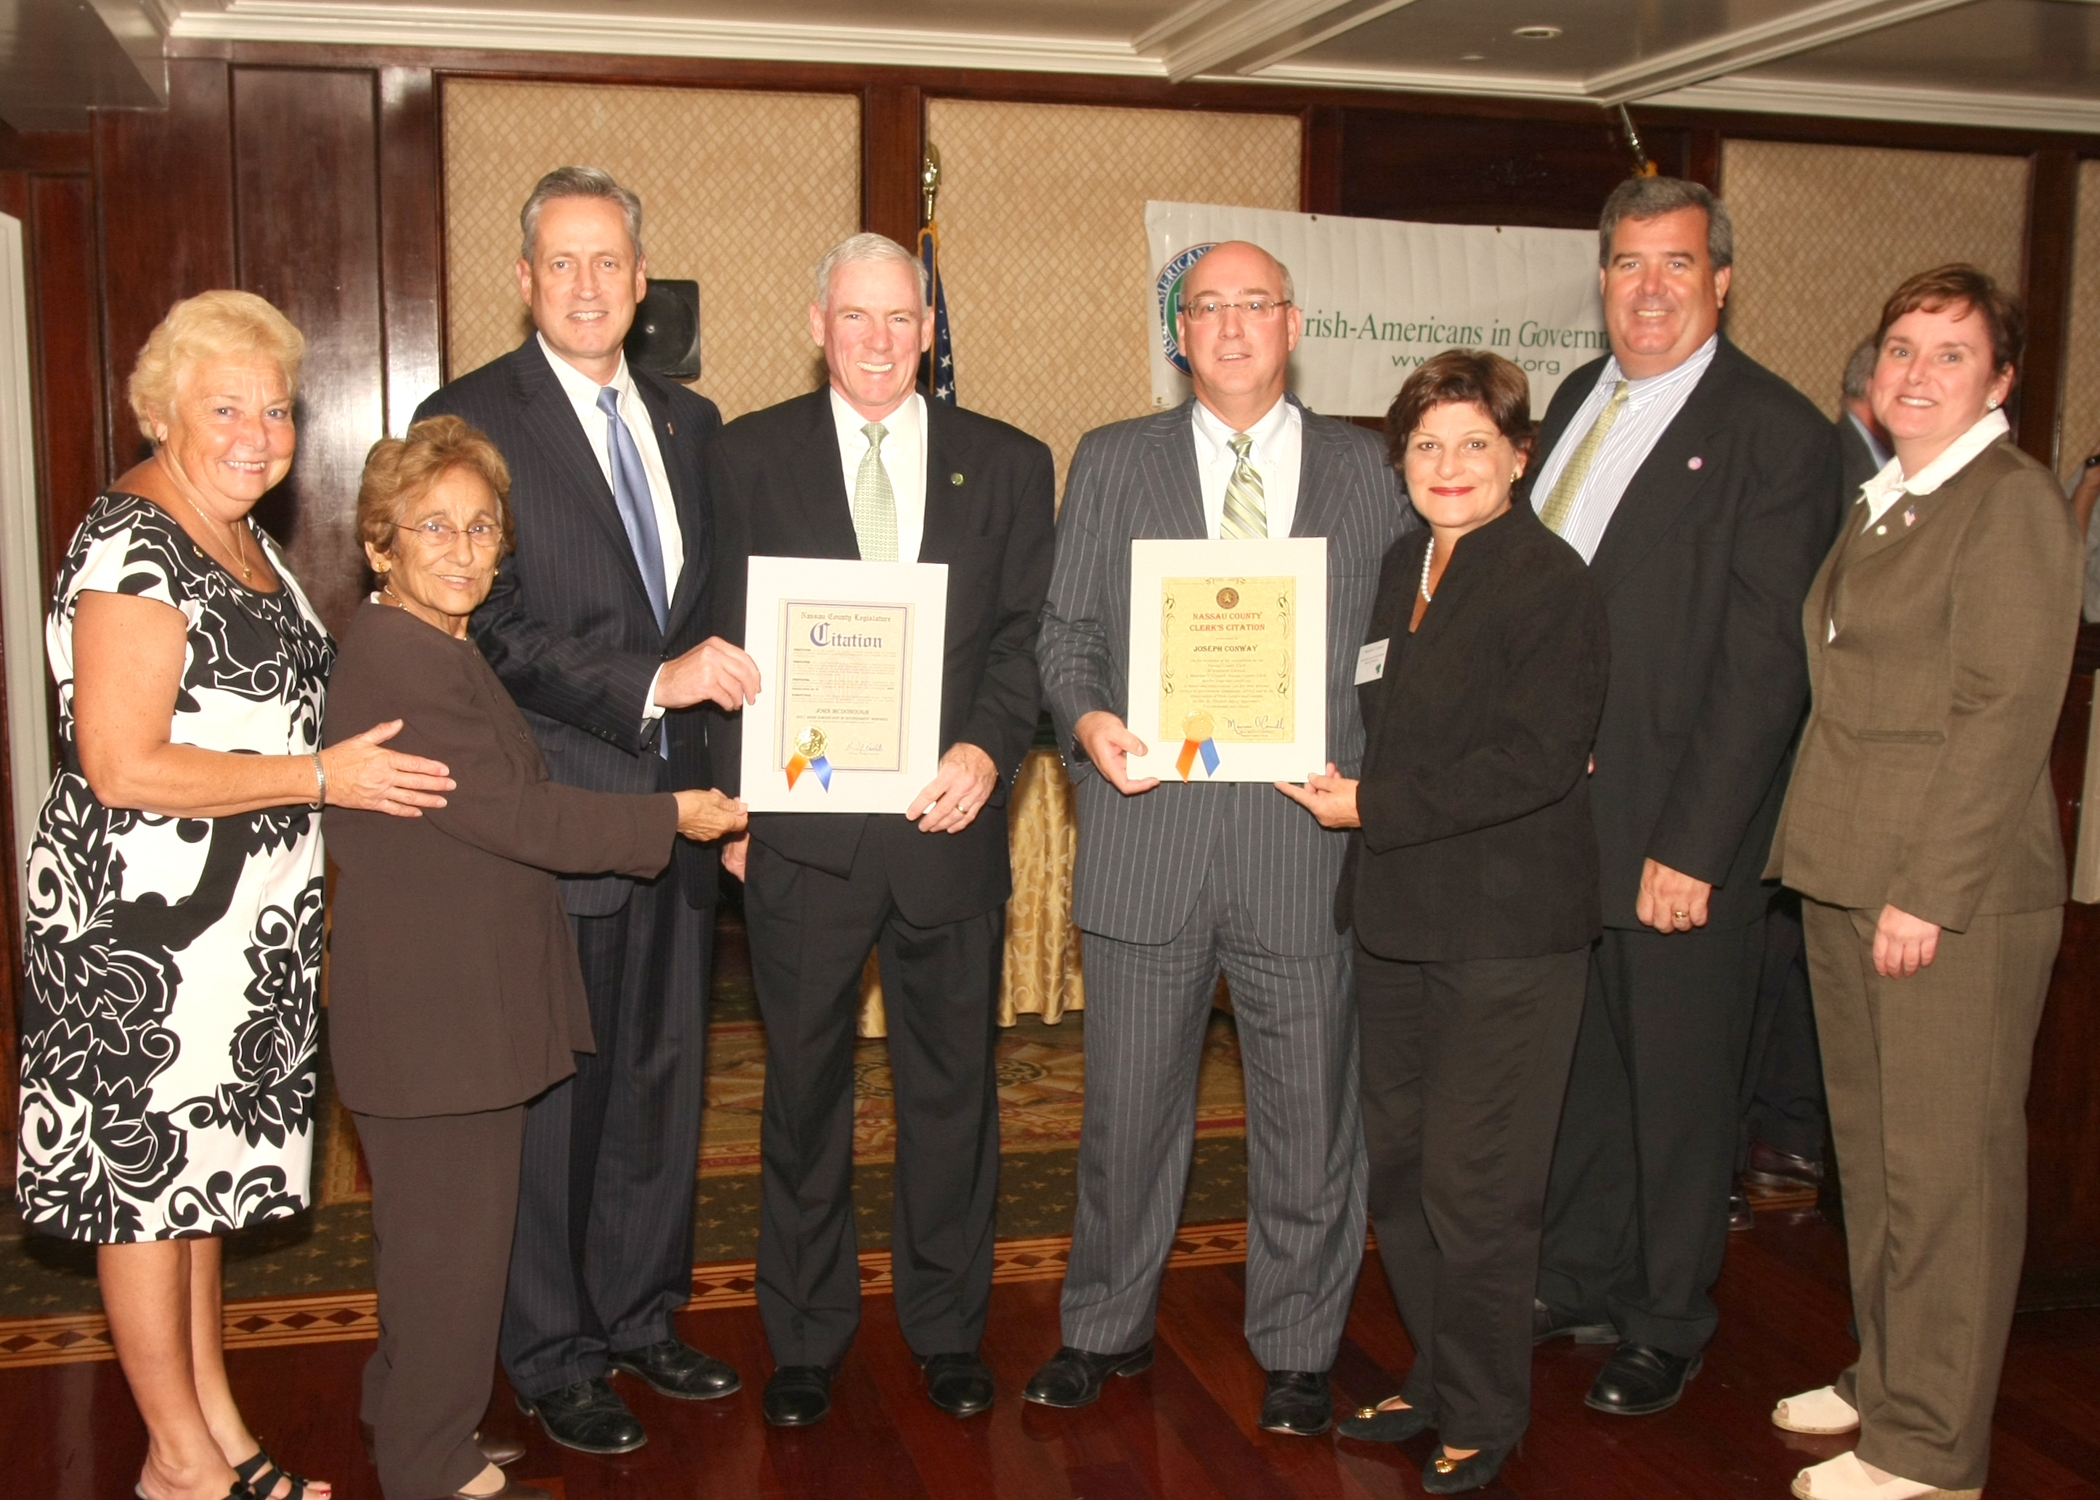 COUNTY CLERK CELEBRATES IRISH AMERICANS IN GOVERNMENT HONOREES